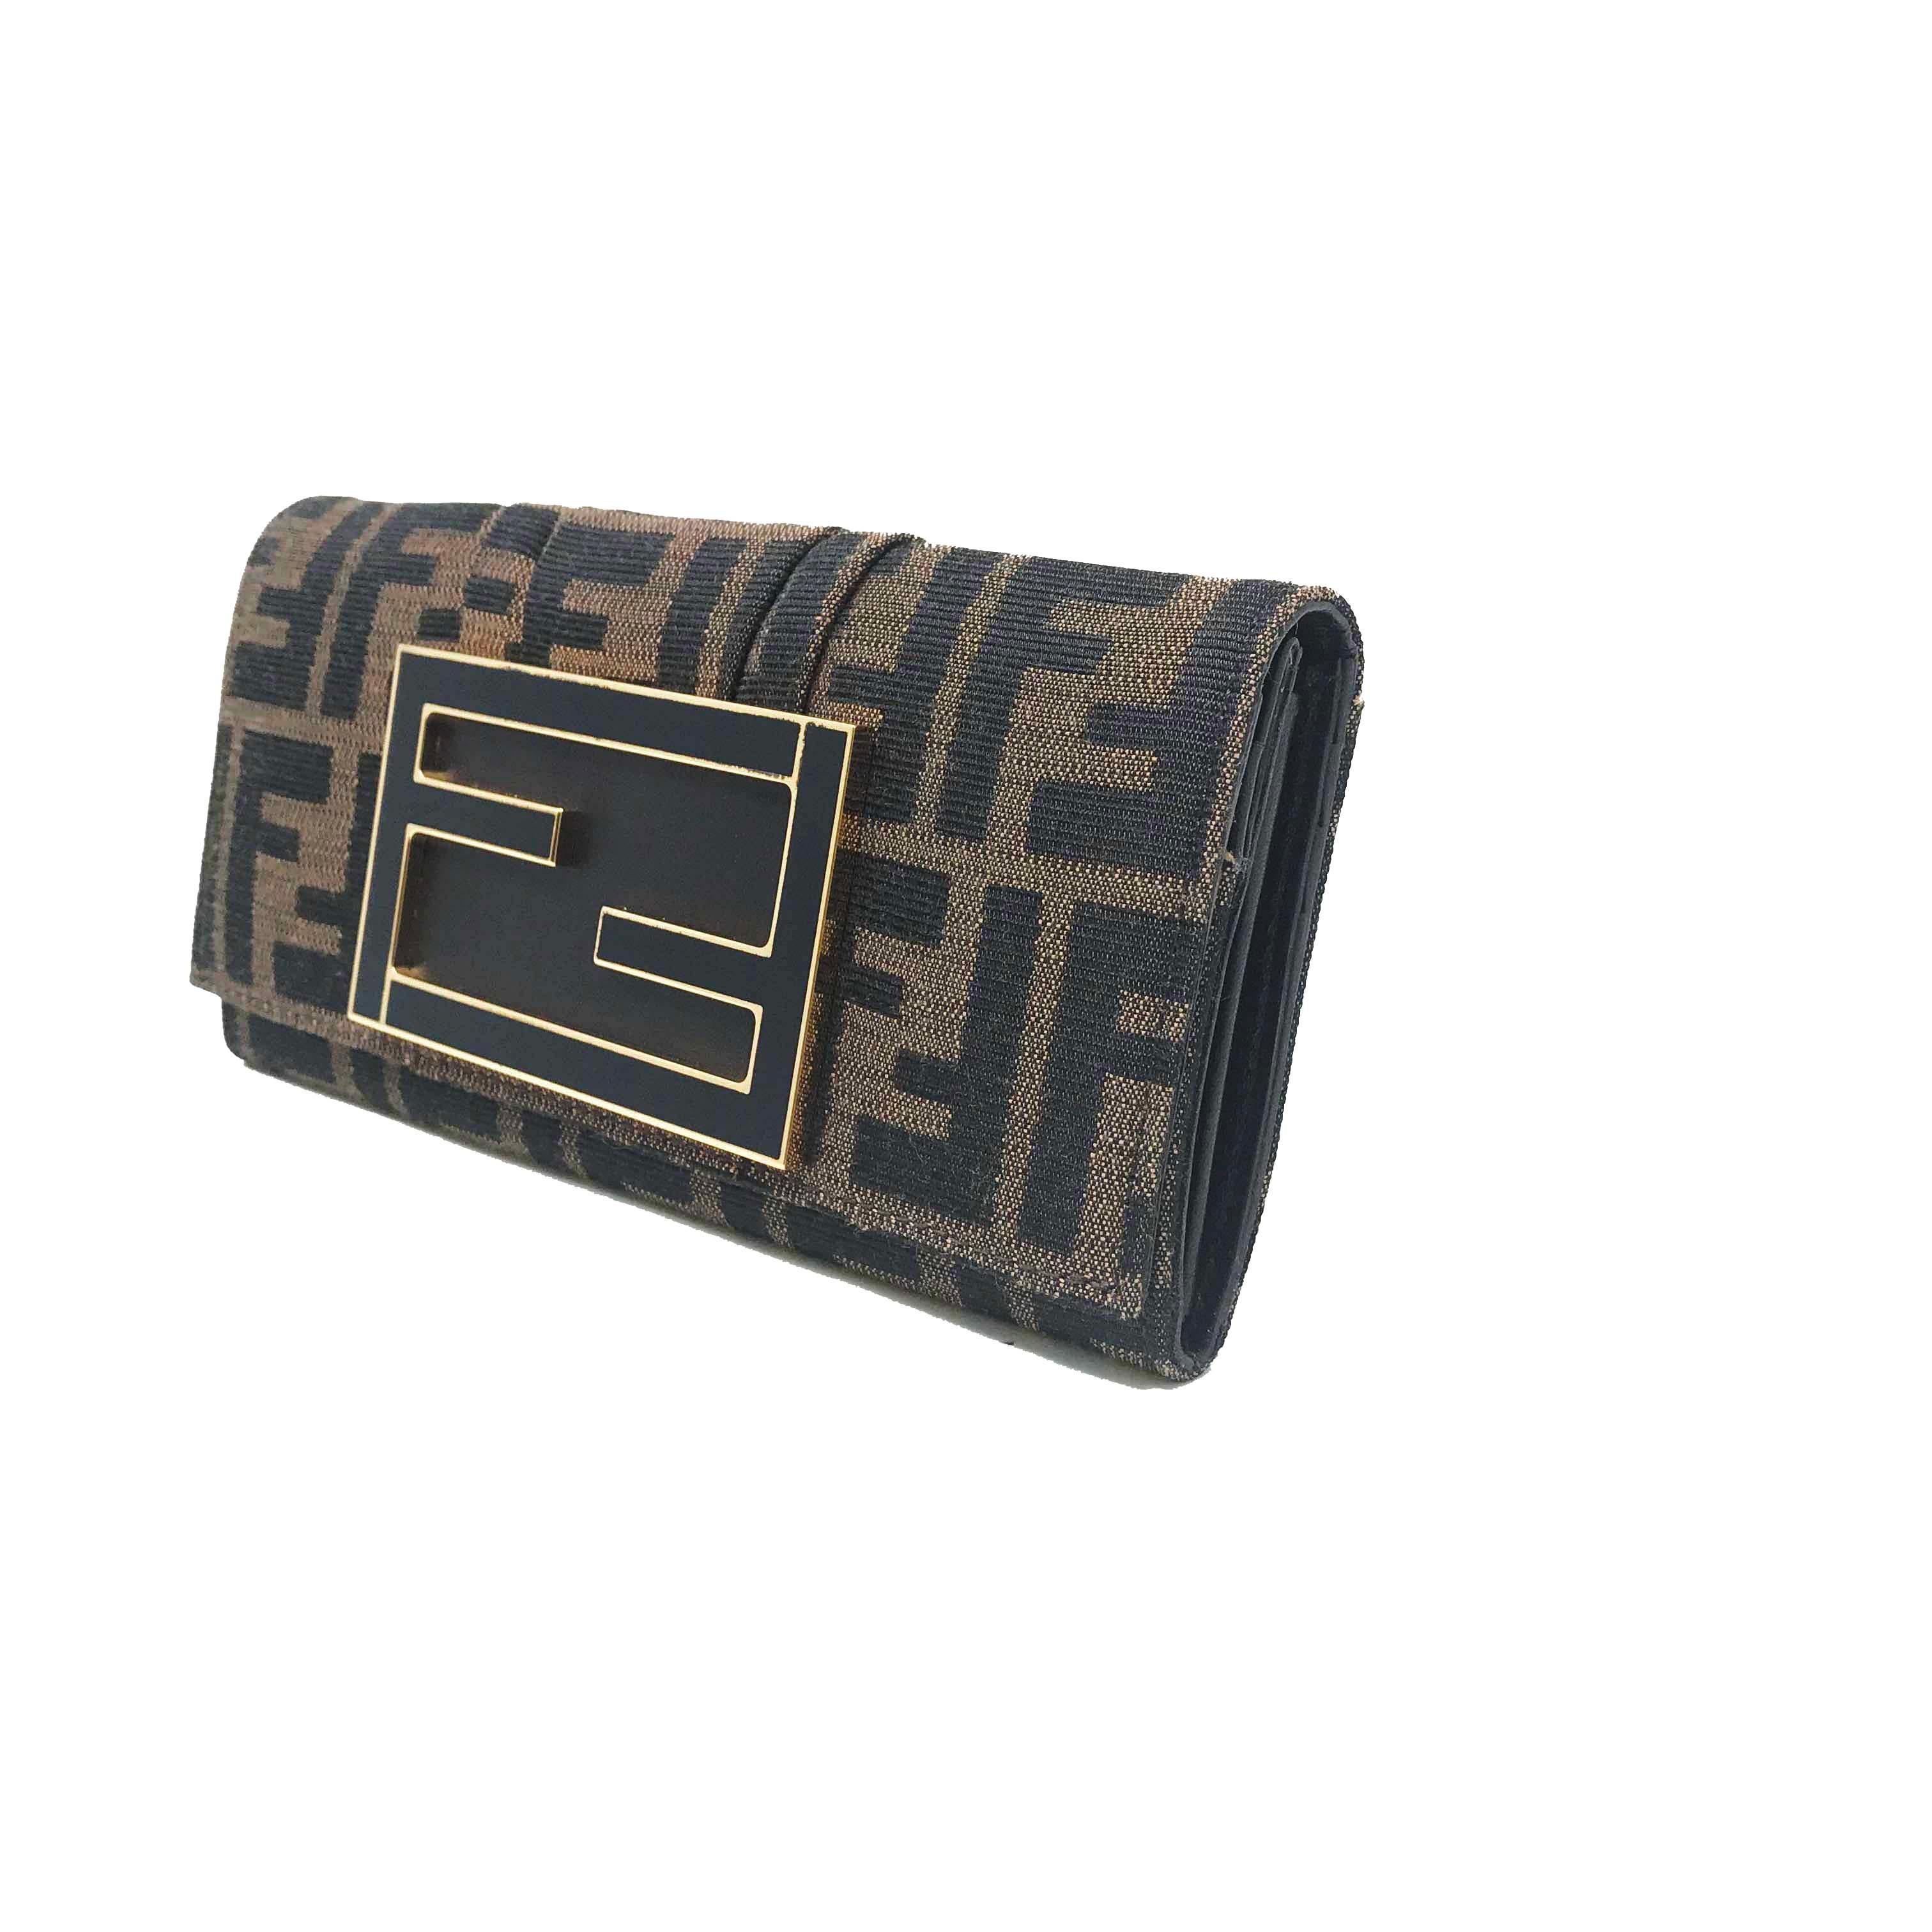 We guarantee this is an authentic FENDI Zucca Mia Clutch Wallet Tobacco or 100% of your money back. This stunning clutch is crafted of Fendi Zucca monogram canvas. The bag features a frontal Fendi FF brass embellishment and opens to a partitioned